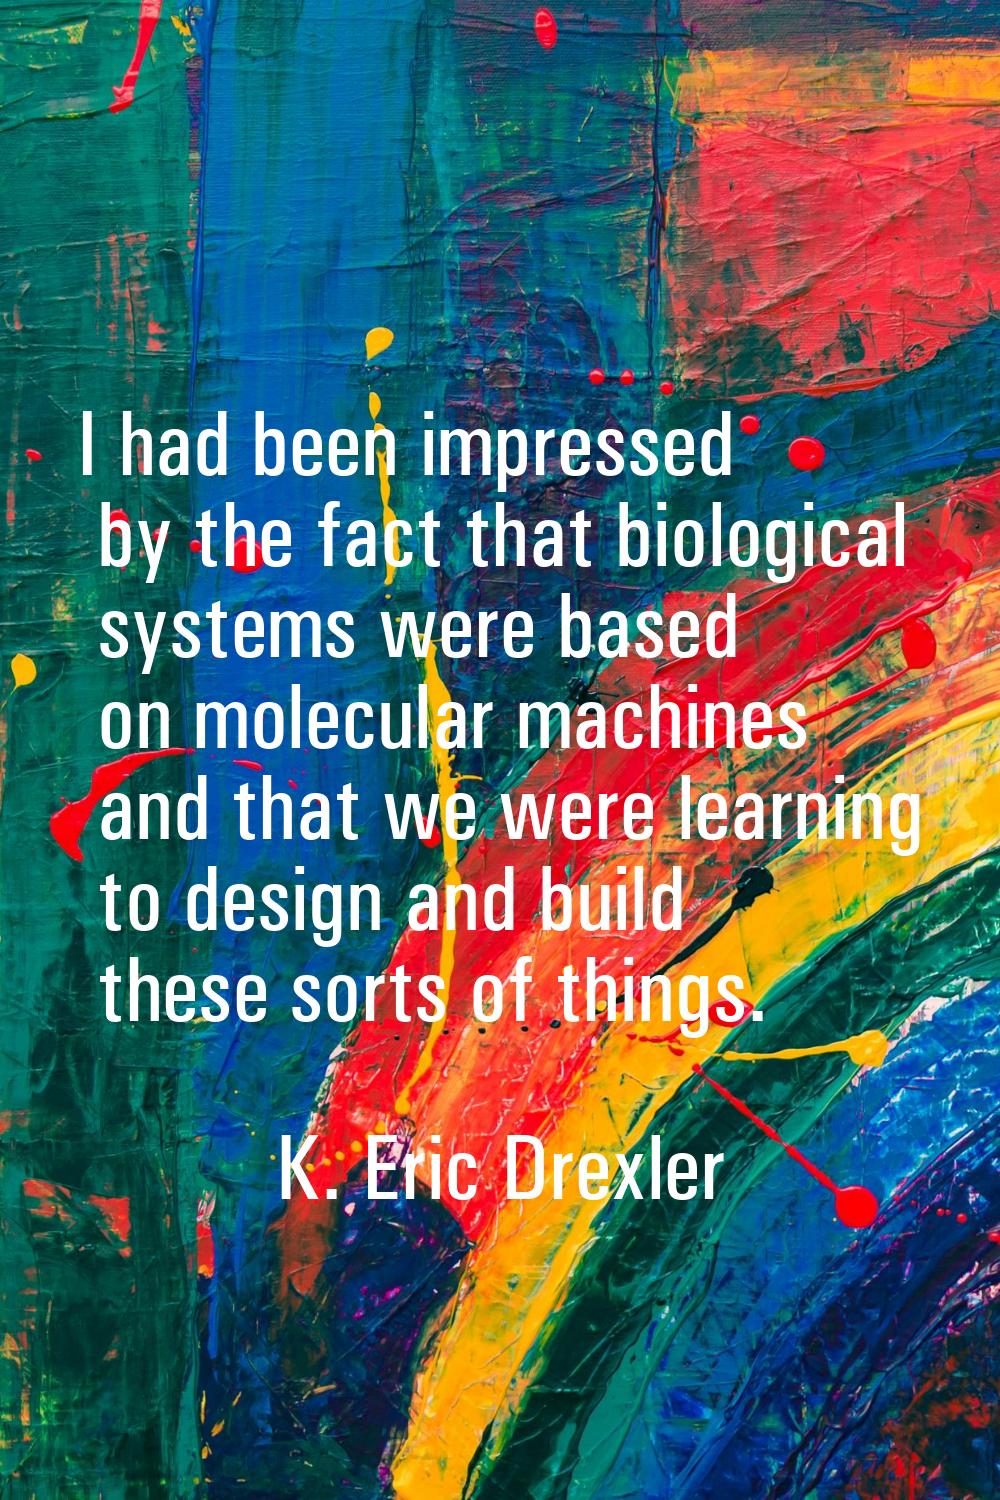 I had been impressed by the fact that biological systems were based on molecular machines and that 